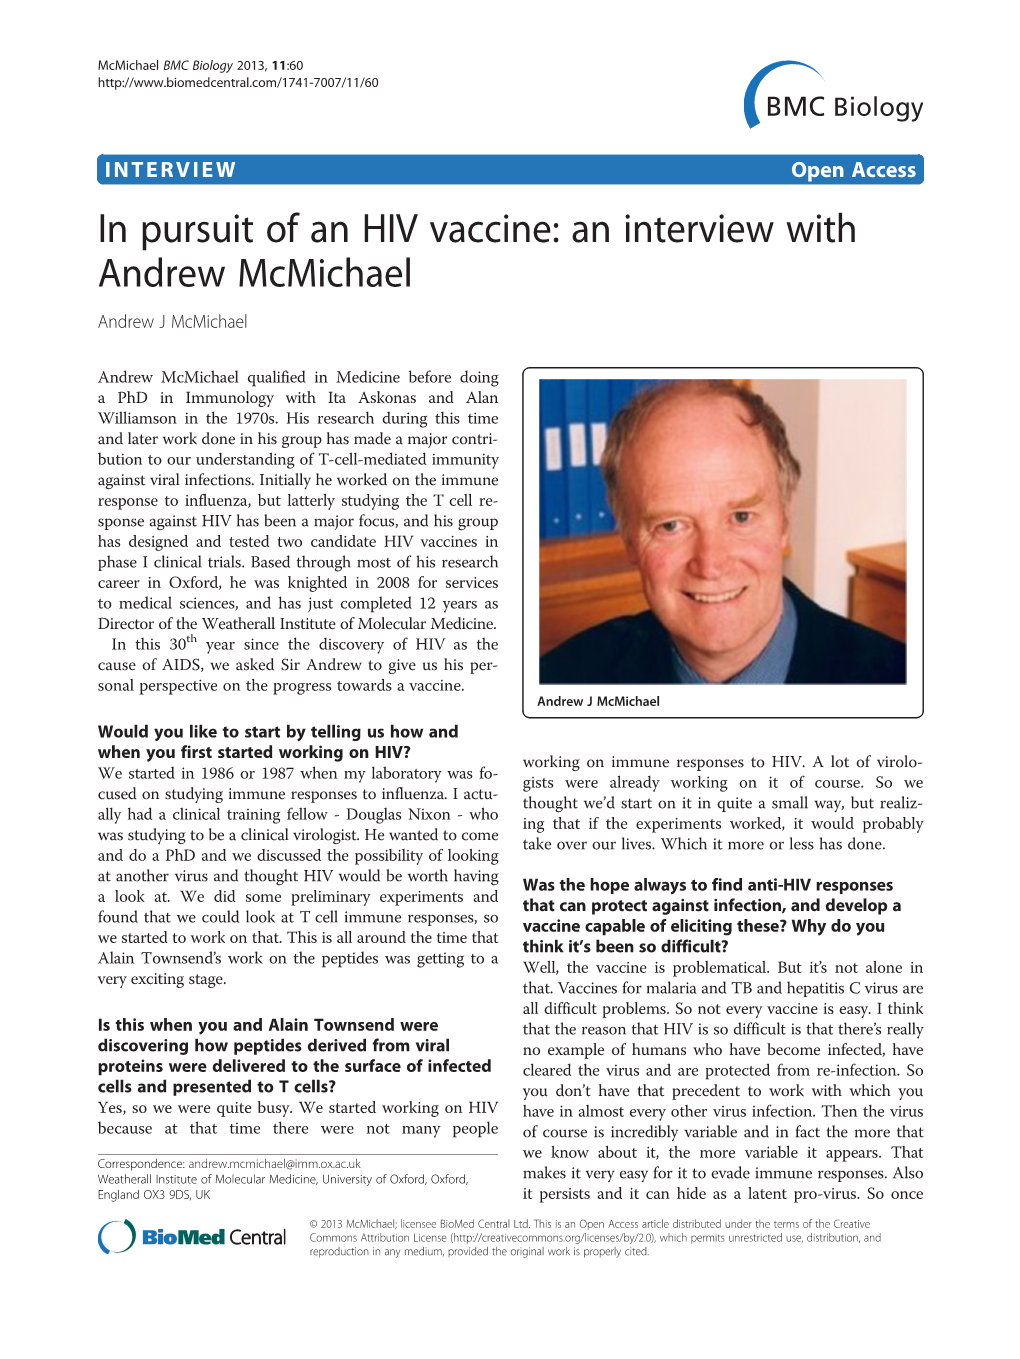 In Pursuit of an HIV Vaccine: an Interview with Andrew Mcmichael Andrew J Mcmichael